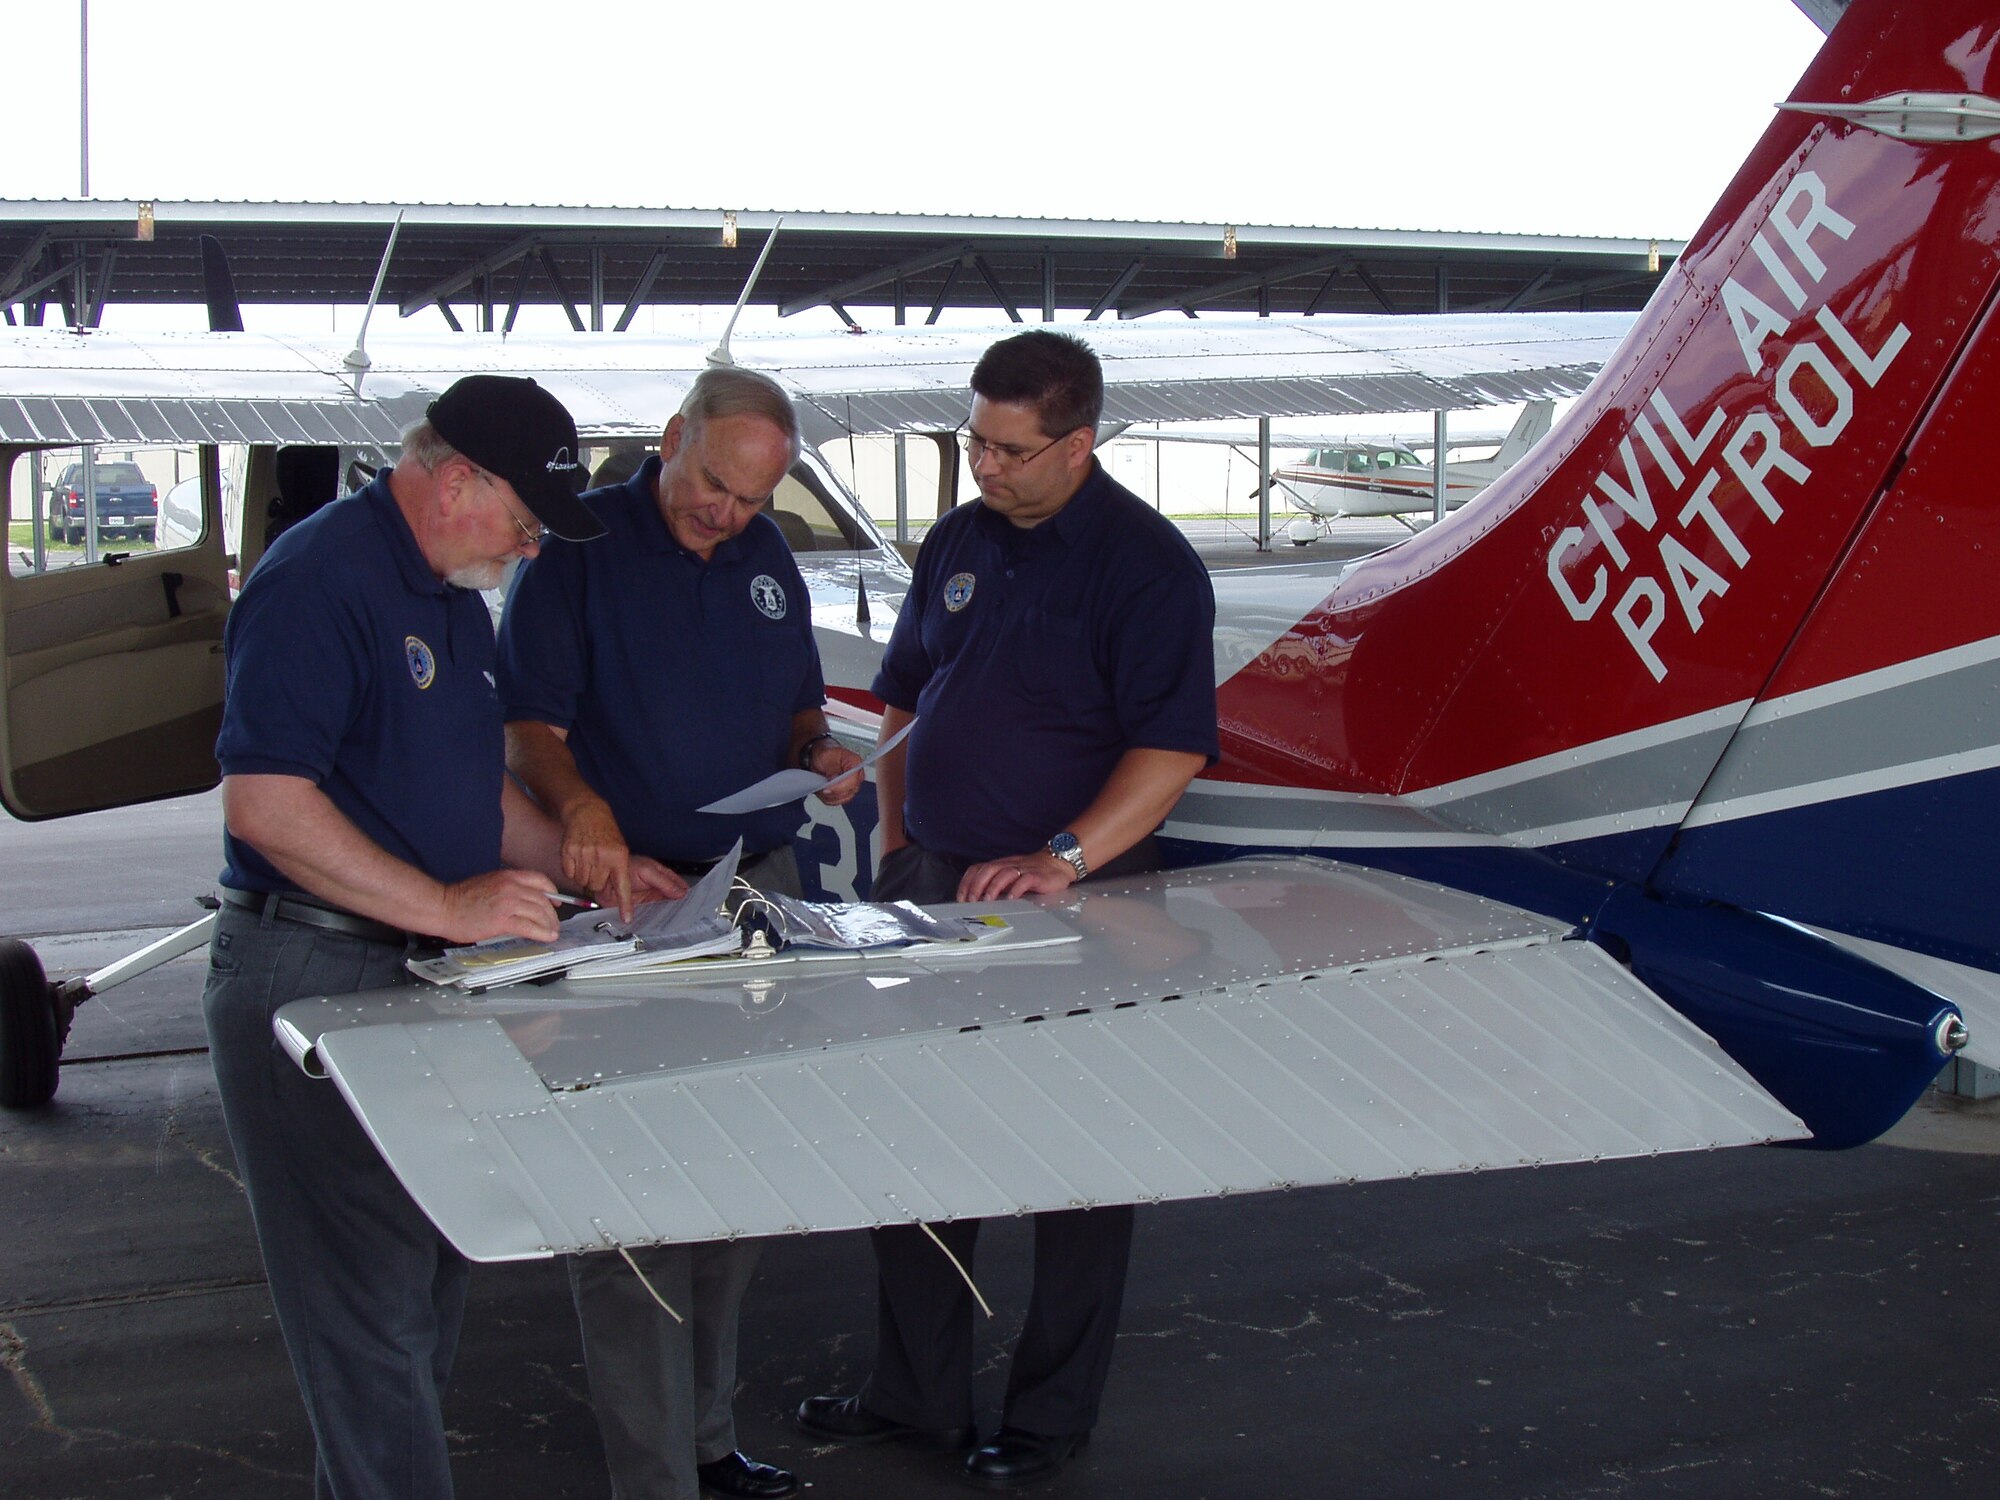 Members of the Missouri Wing prepare for another sortie on the third day of the exercise: (from left) Capts. Jack Gray, Gil Franck, and Mike Schaefer.  Gray and Schaefer are members of the Mid Rivers Senior Squadron while Franck is a member of the Gateway Senior Squadron. (Civil Air Patrol photo by Lt. Col. David A. Miller)